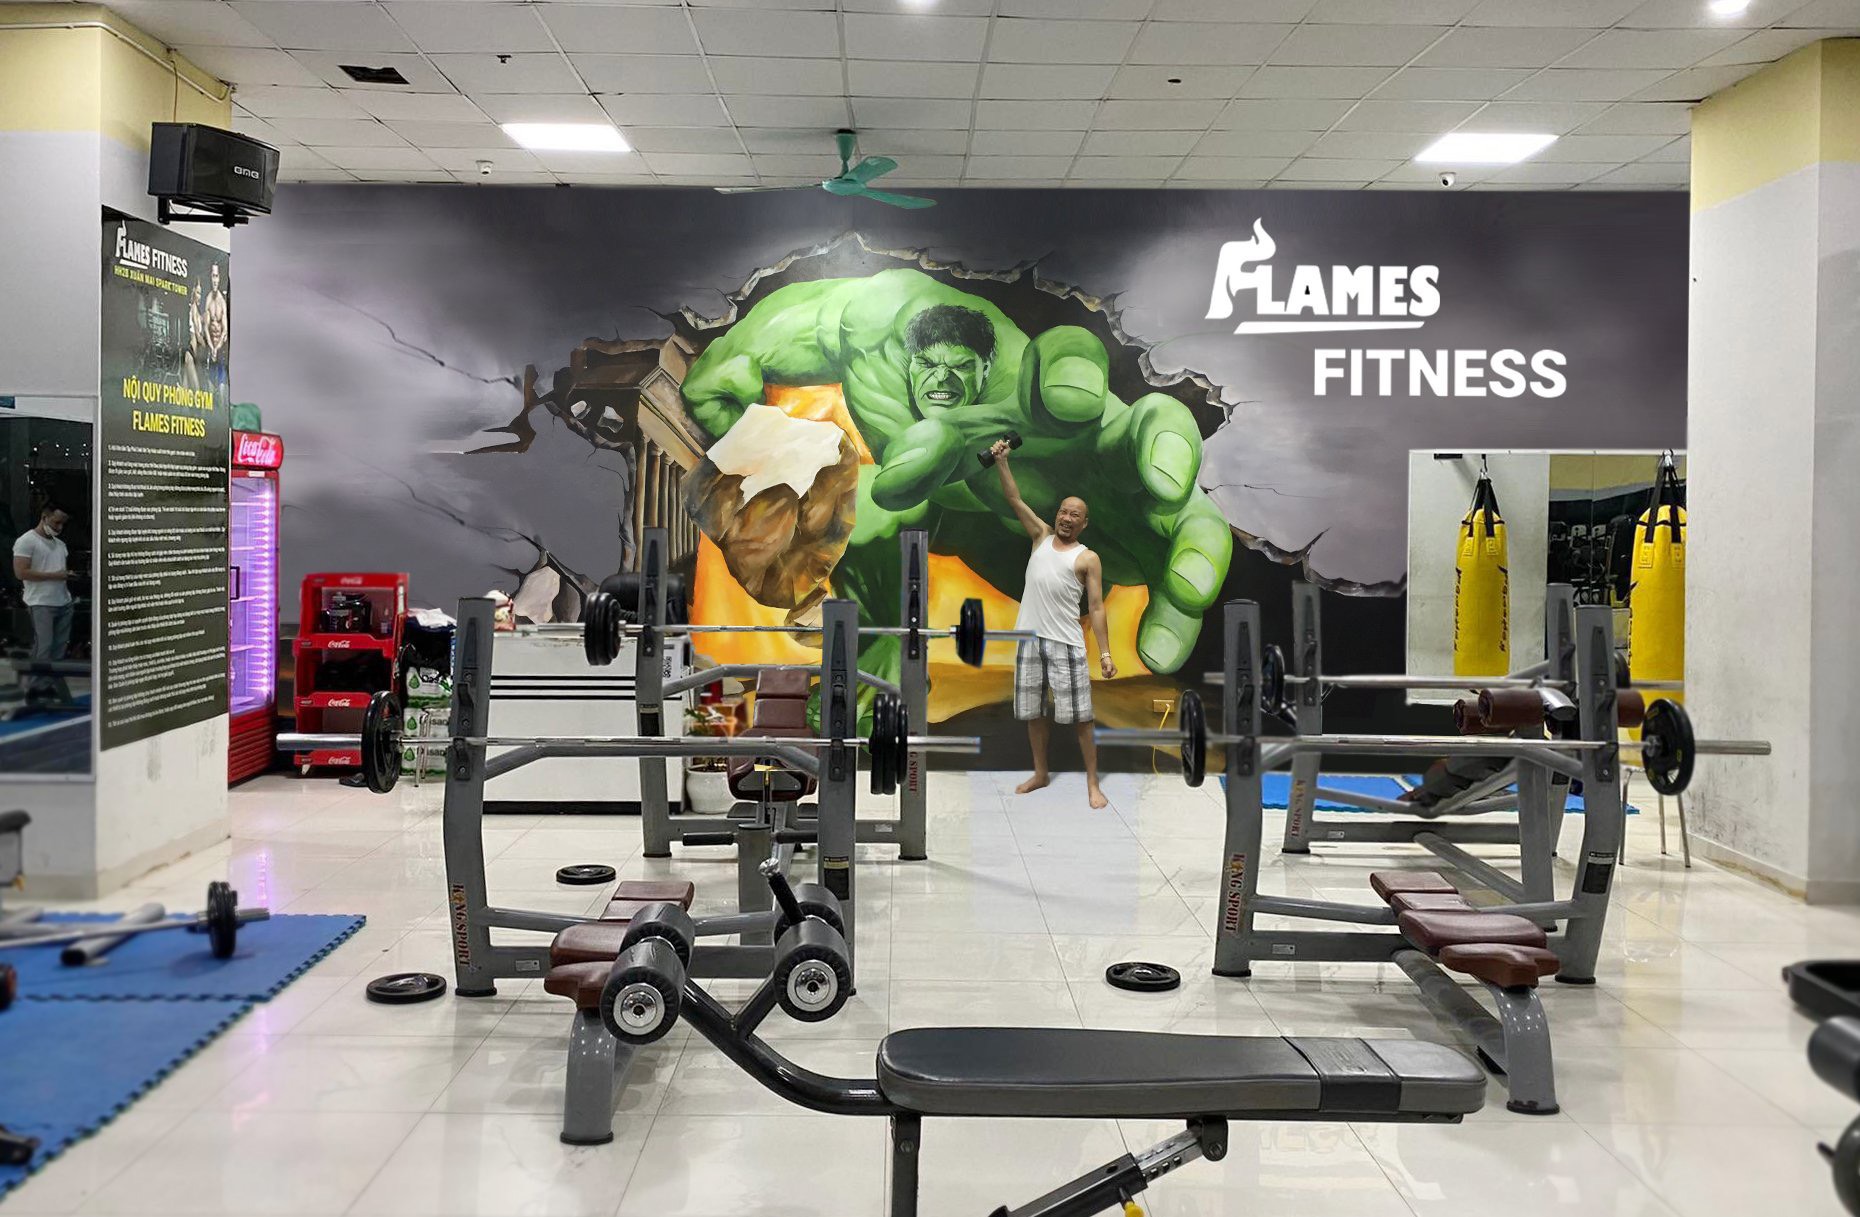 Gym FLAMES FITNESS 3D wall painting template design